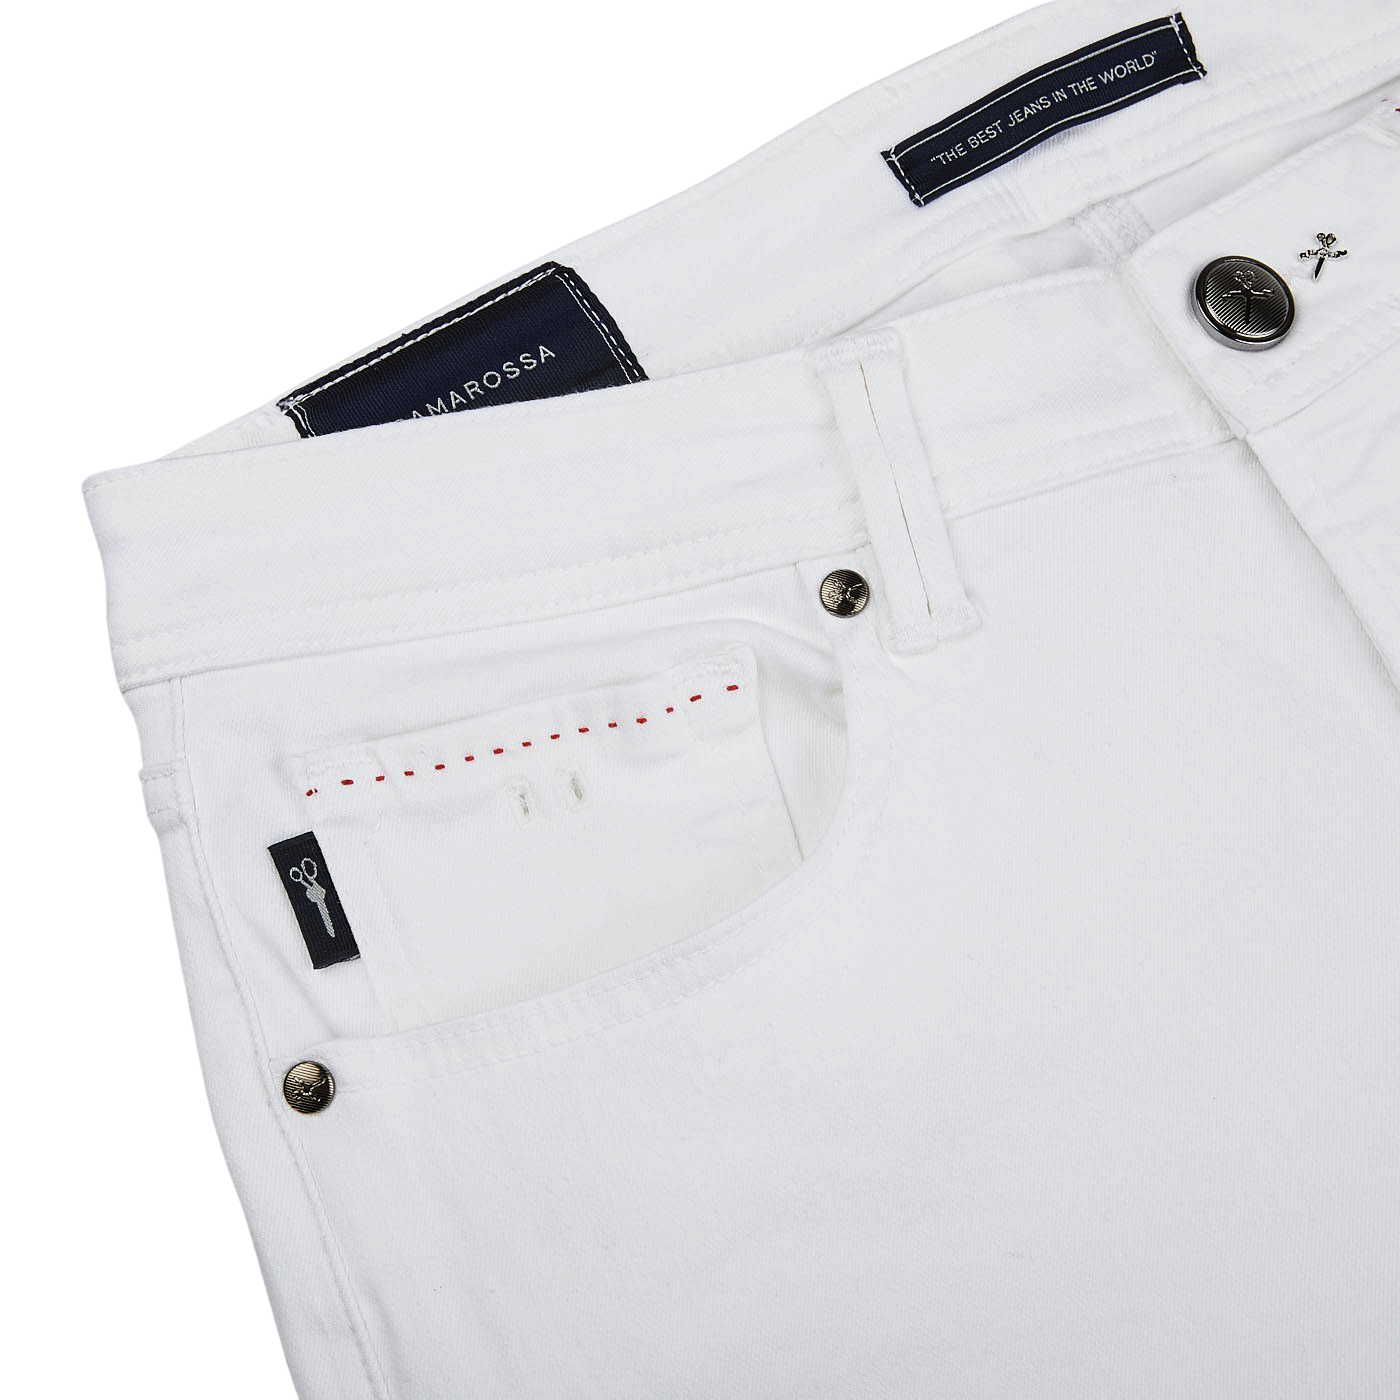 A pair of Tramarossa White Super Stretch Michelangelo jeans with a pocket on the side.